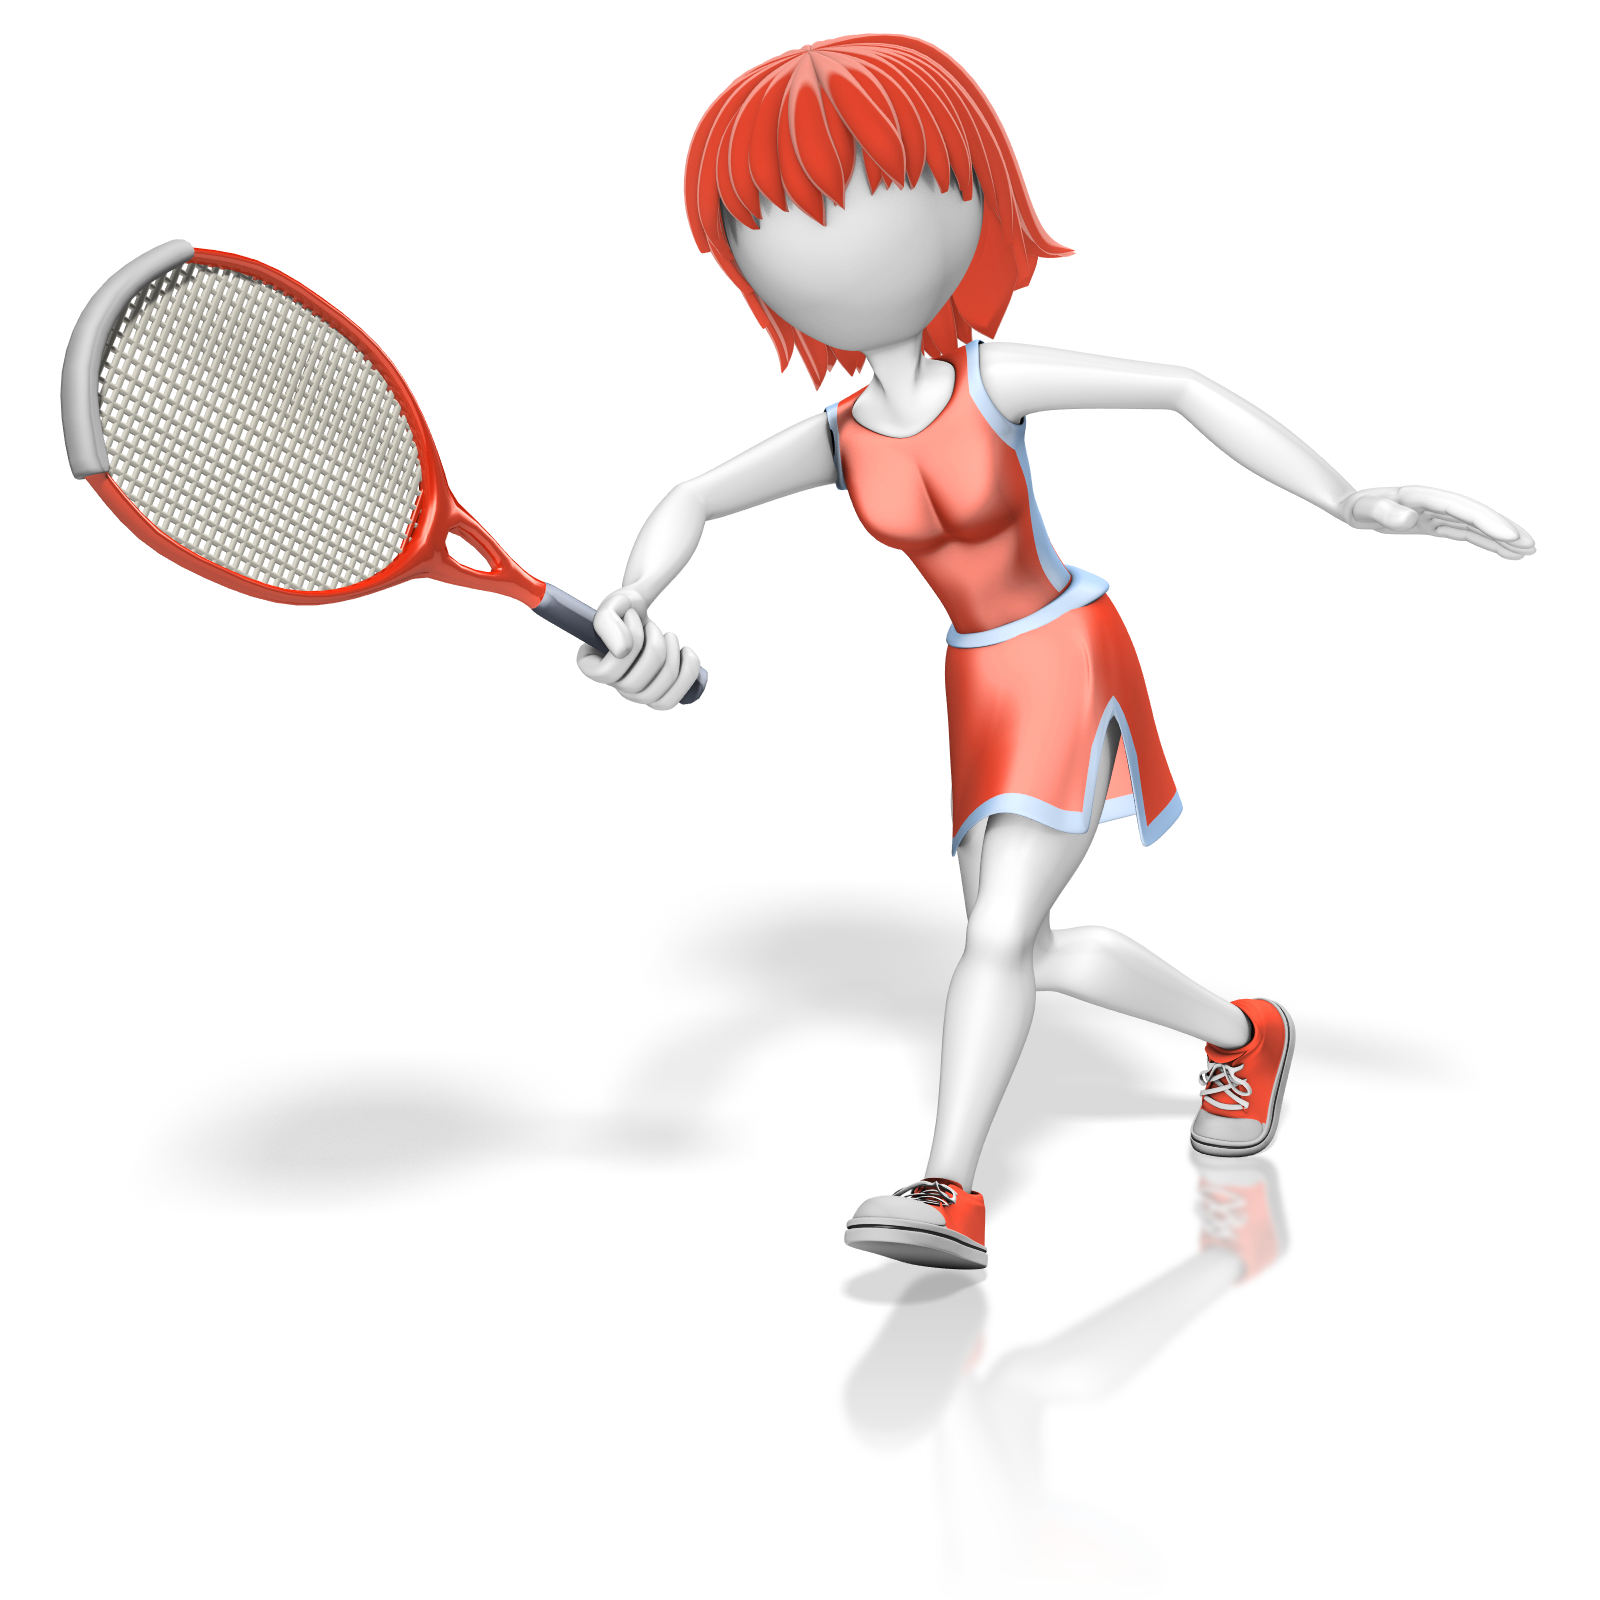 Clipart sports squash, Clipart sports squash Transparent FREE for